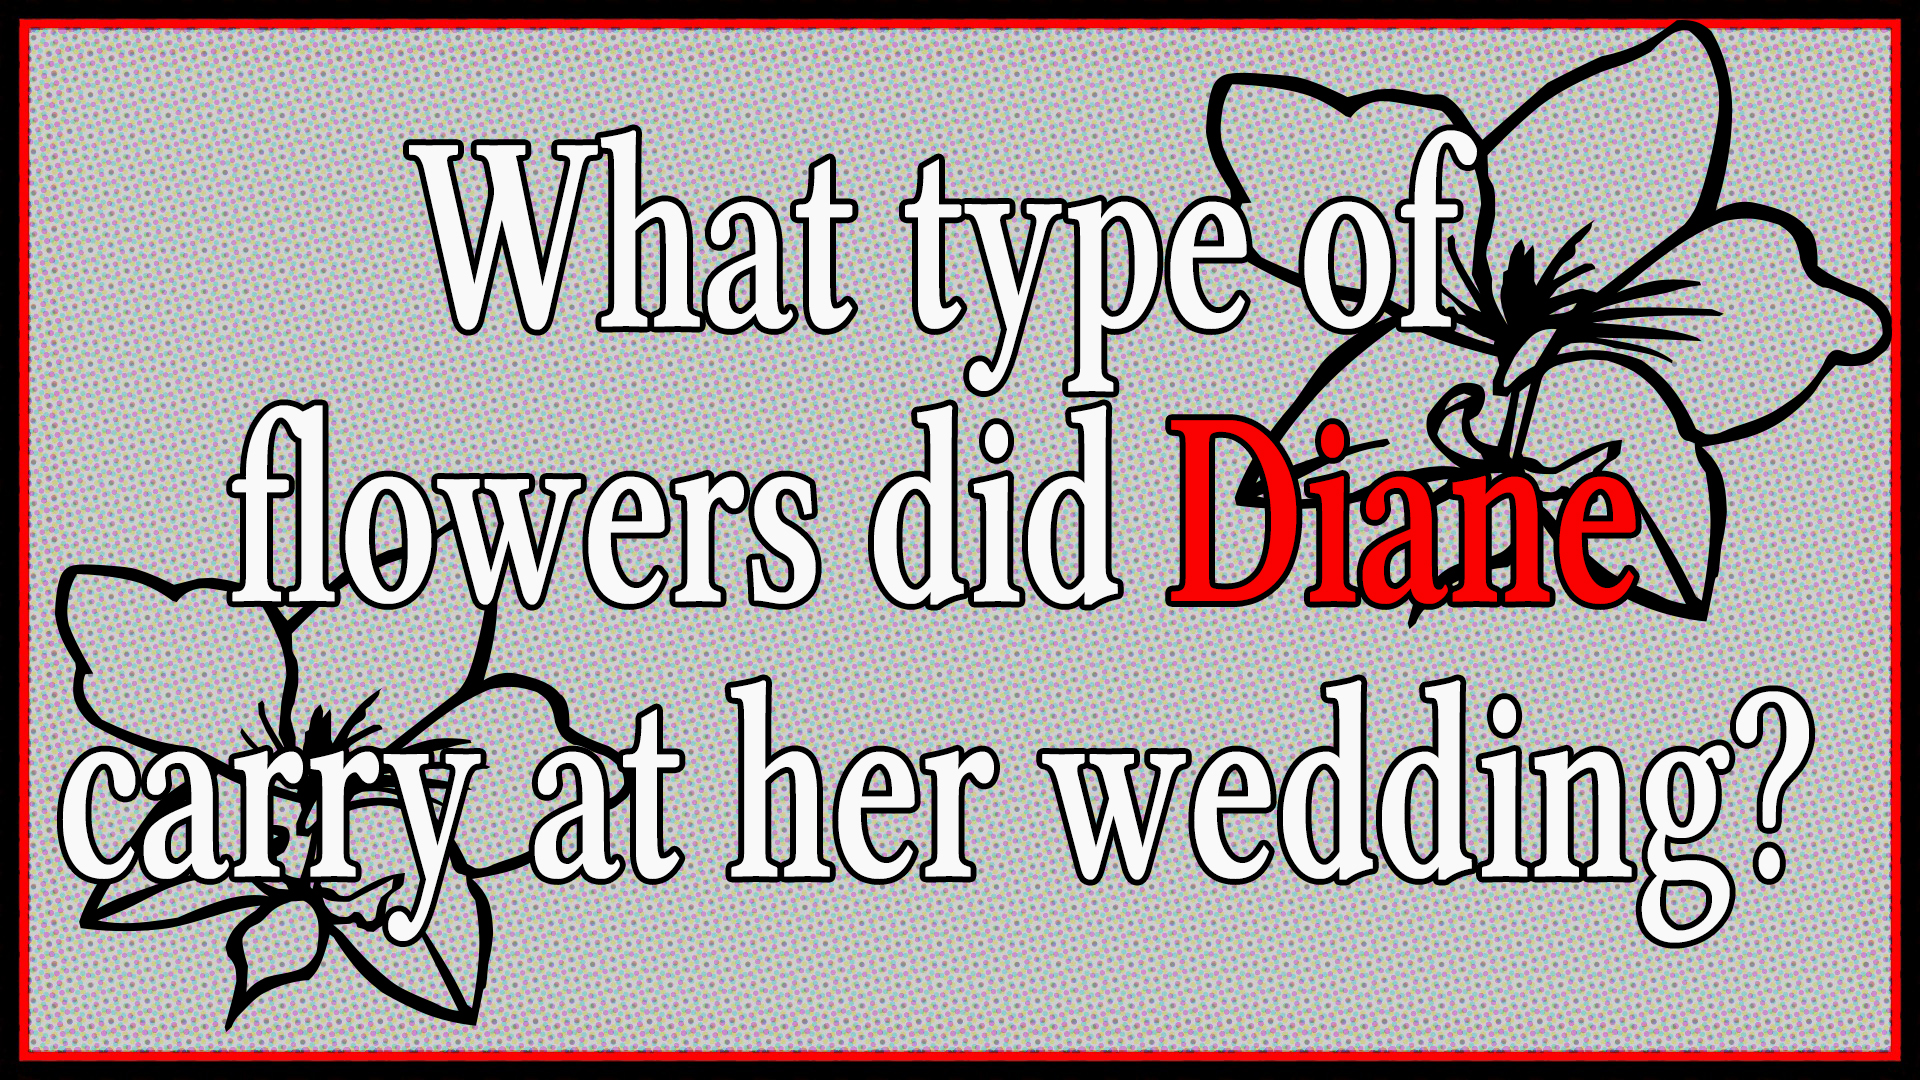 What type of flowers did Diane carry at her wedding?